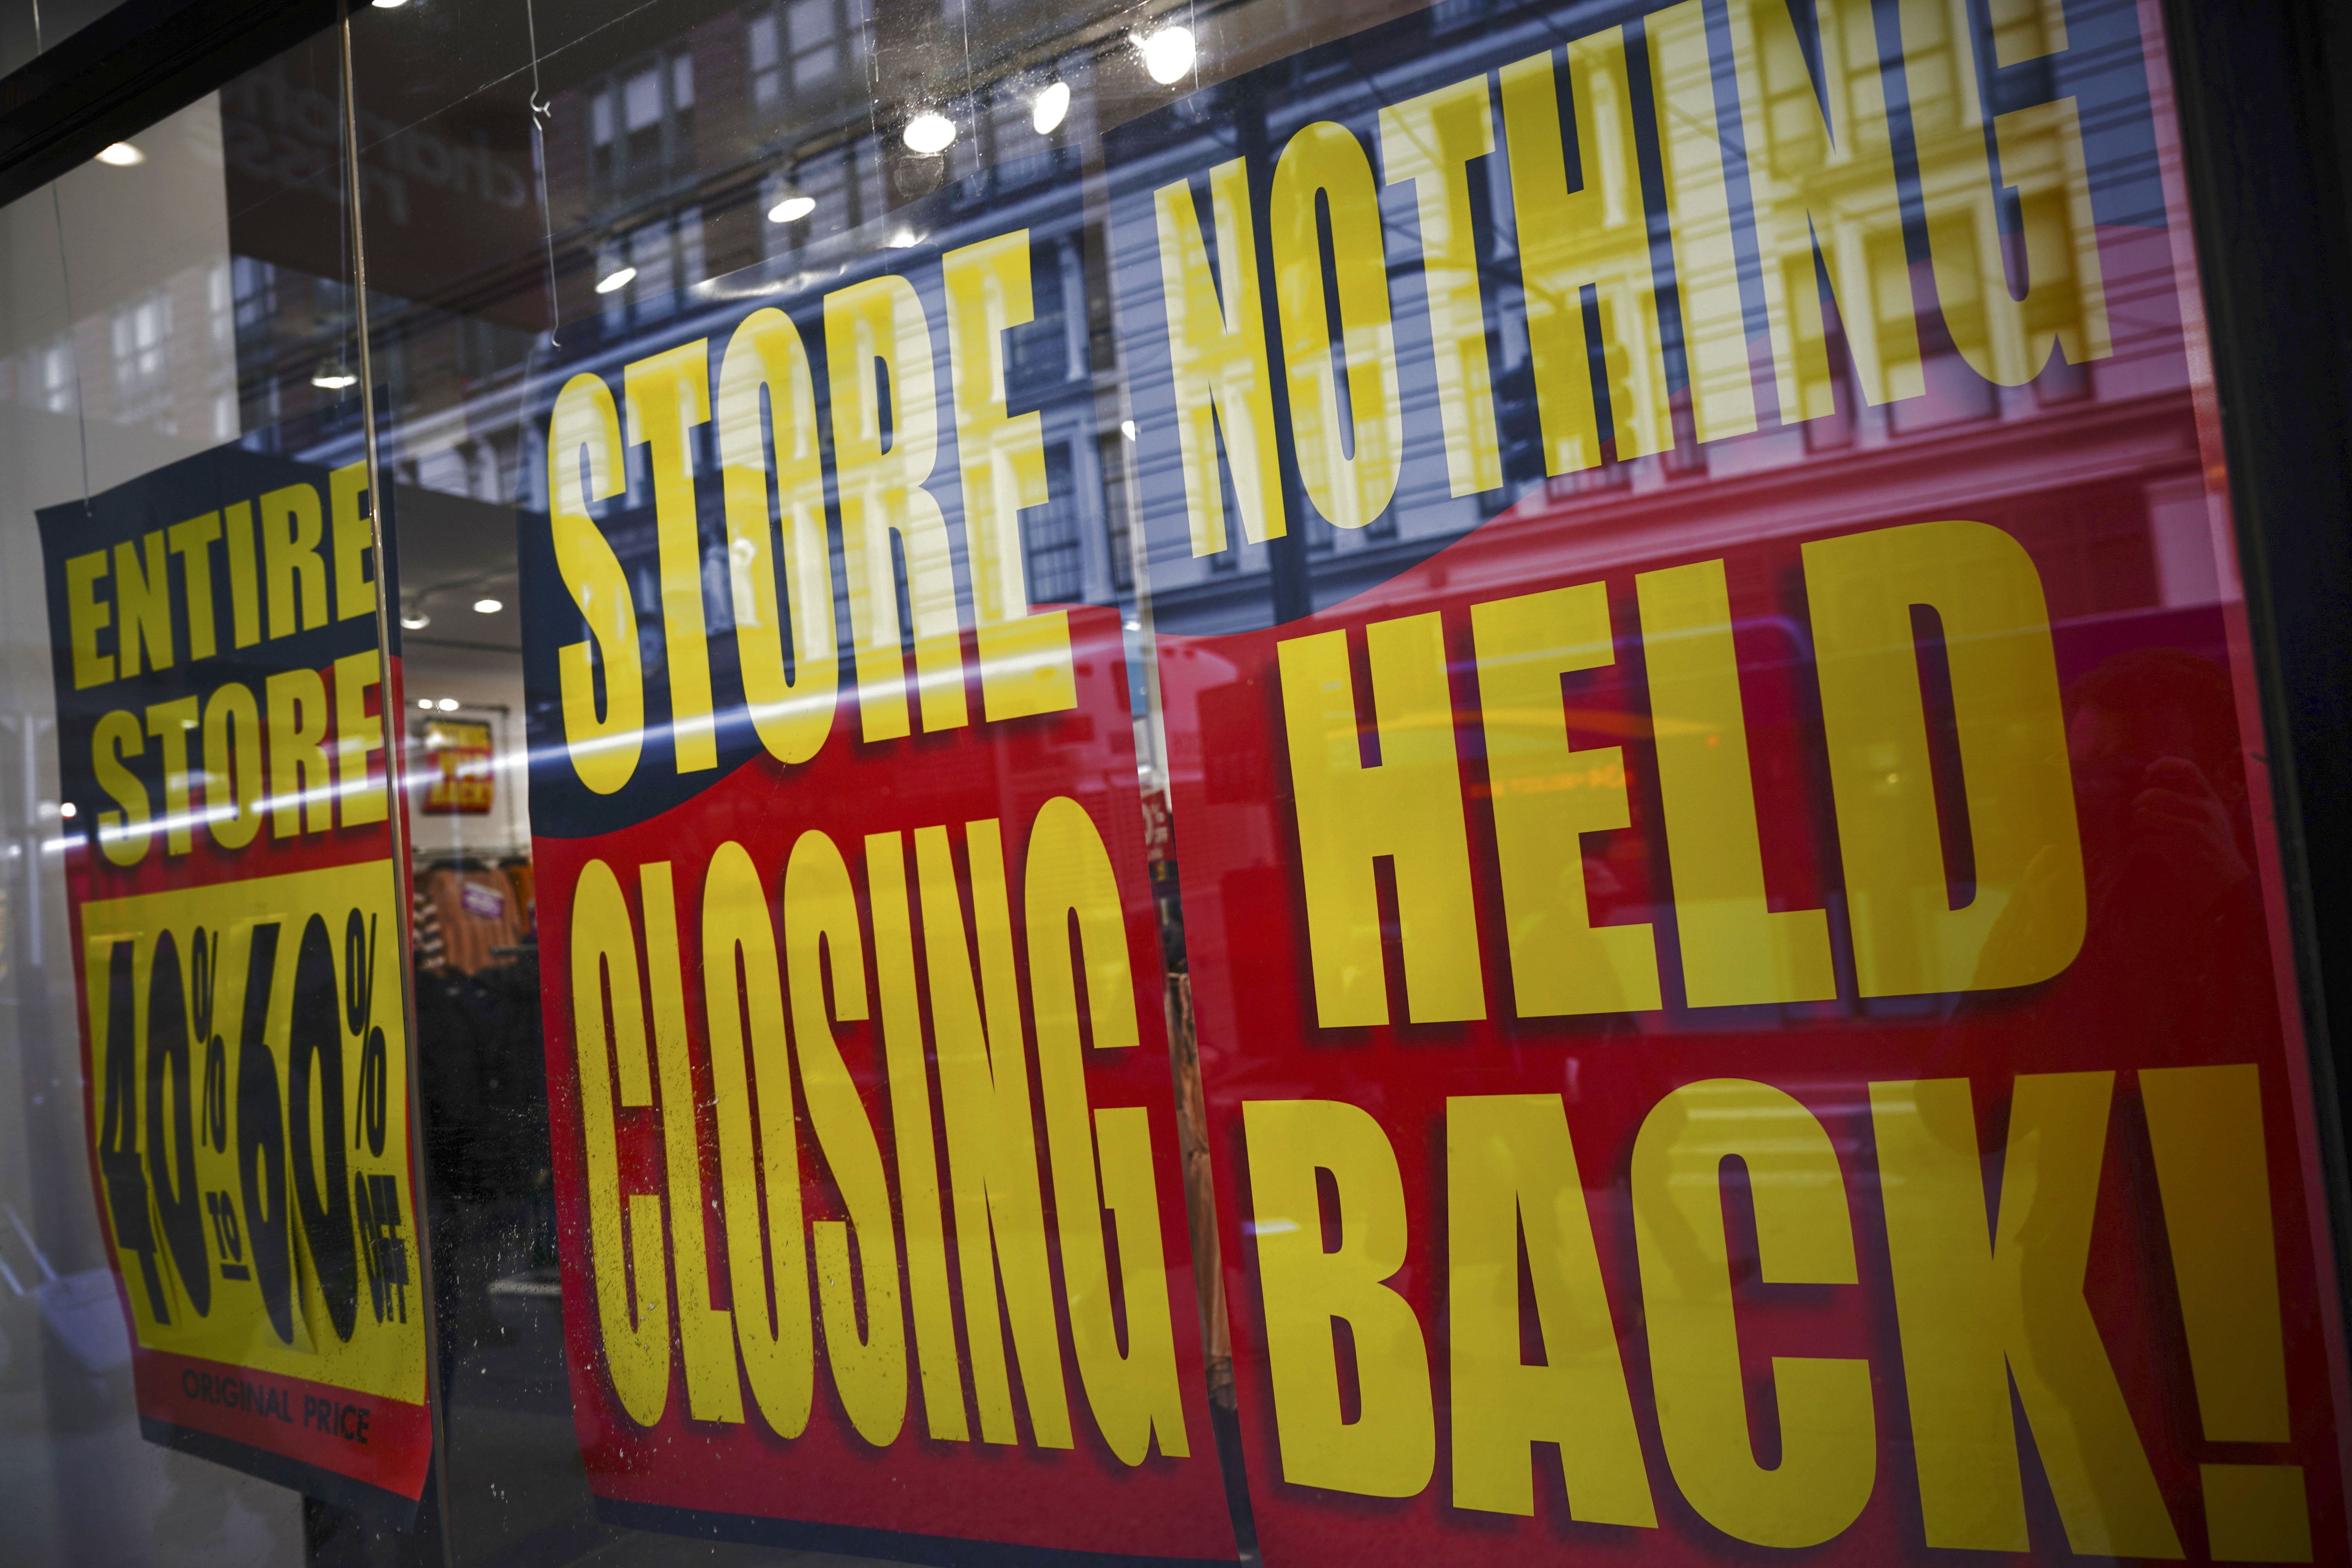 Here's a running list of retail store closures announced in 2019